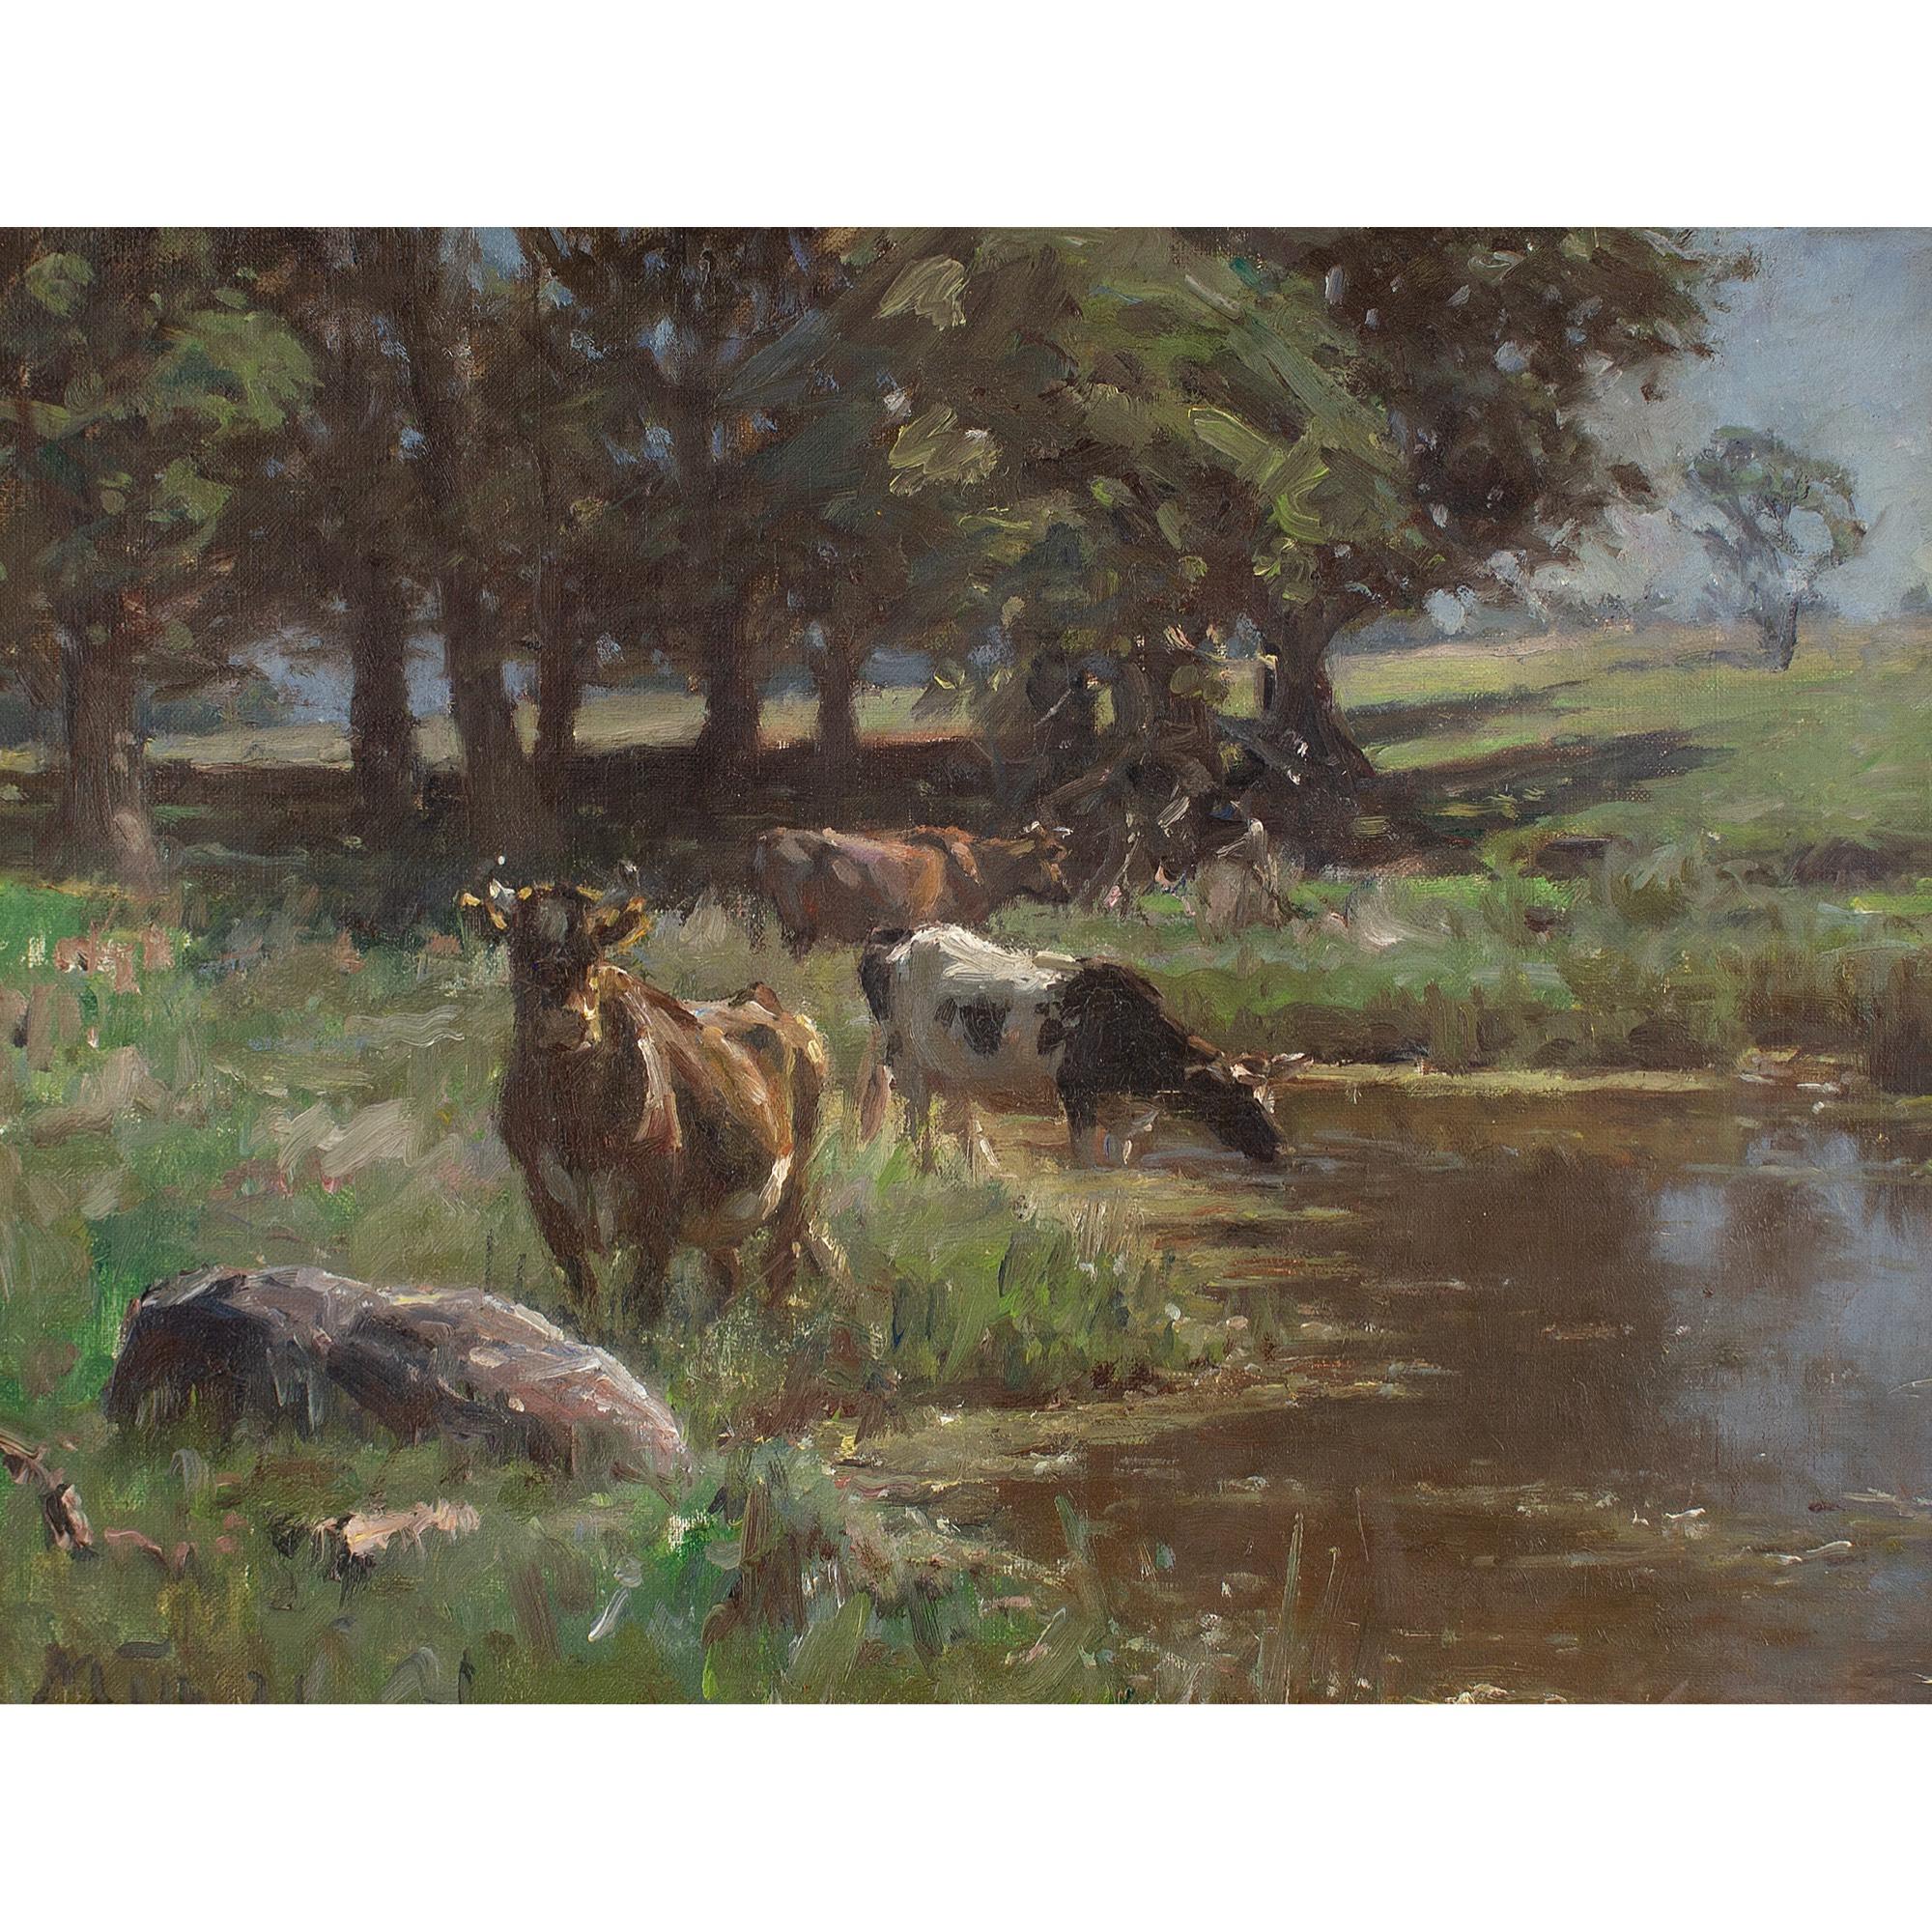 This early 20th-century oil painting by accomplished Danish artist Michael Therkildsen (1850-1925) depicts a pastoral landscape with cattle and pond.

Cows gather by a shimmering pond akin to three weary old friends under the scorching glow of